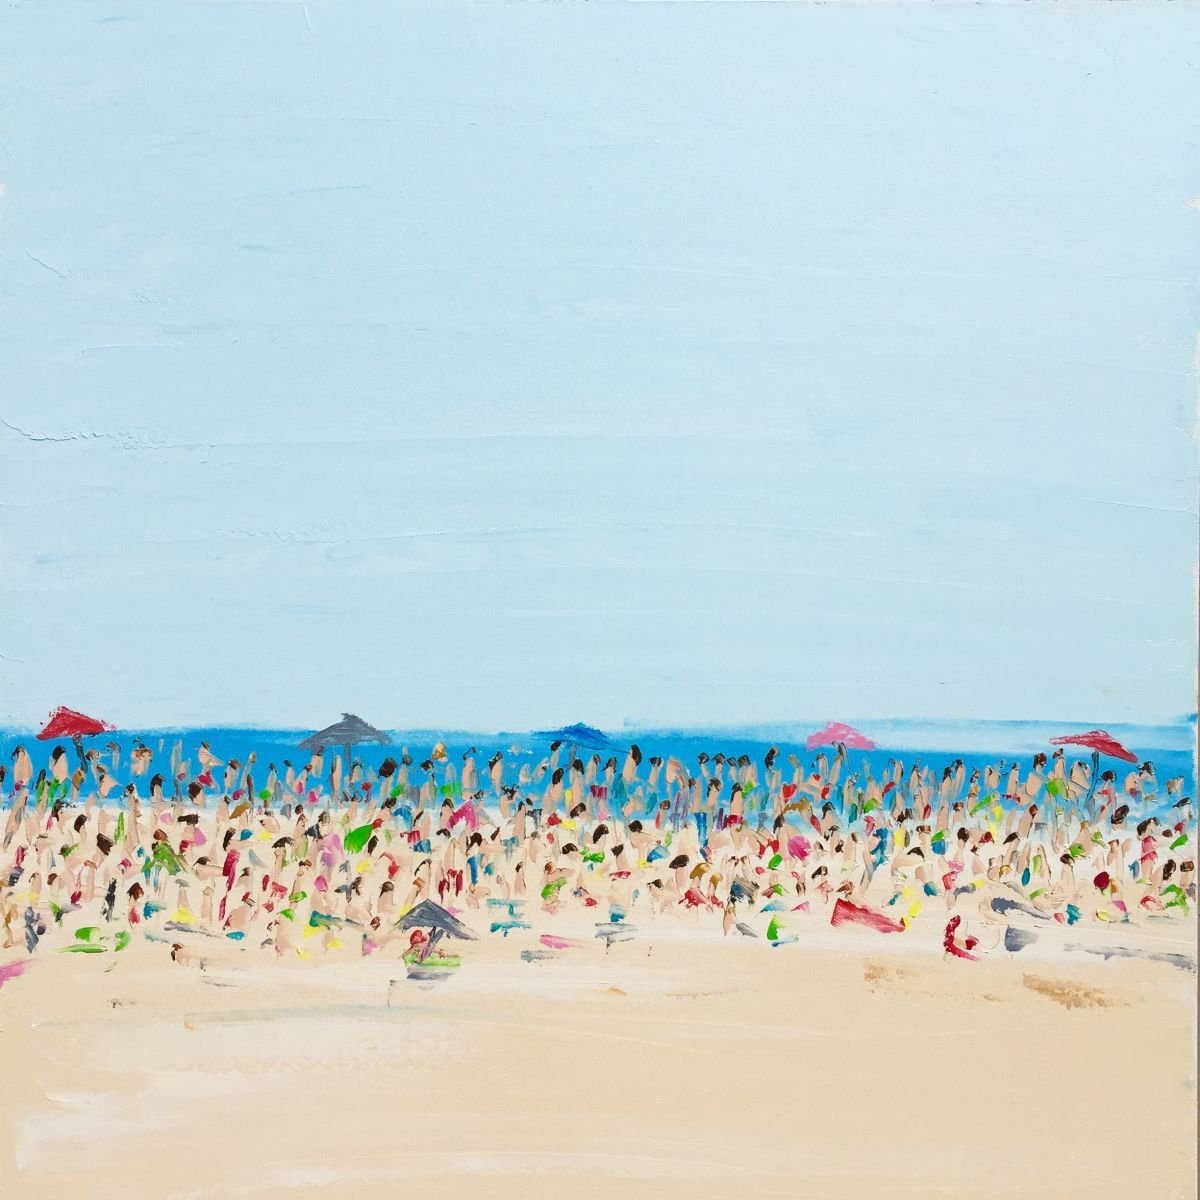 Beach Life - A Crowded Afternoon by Emma Bell